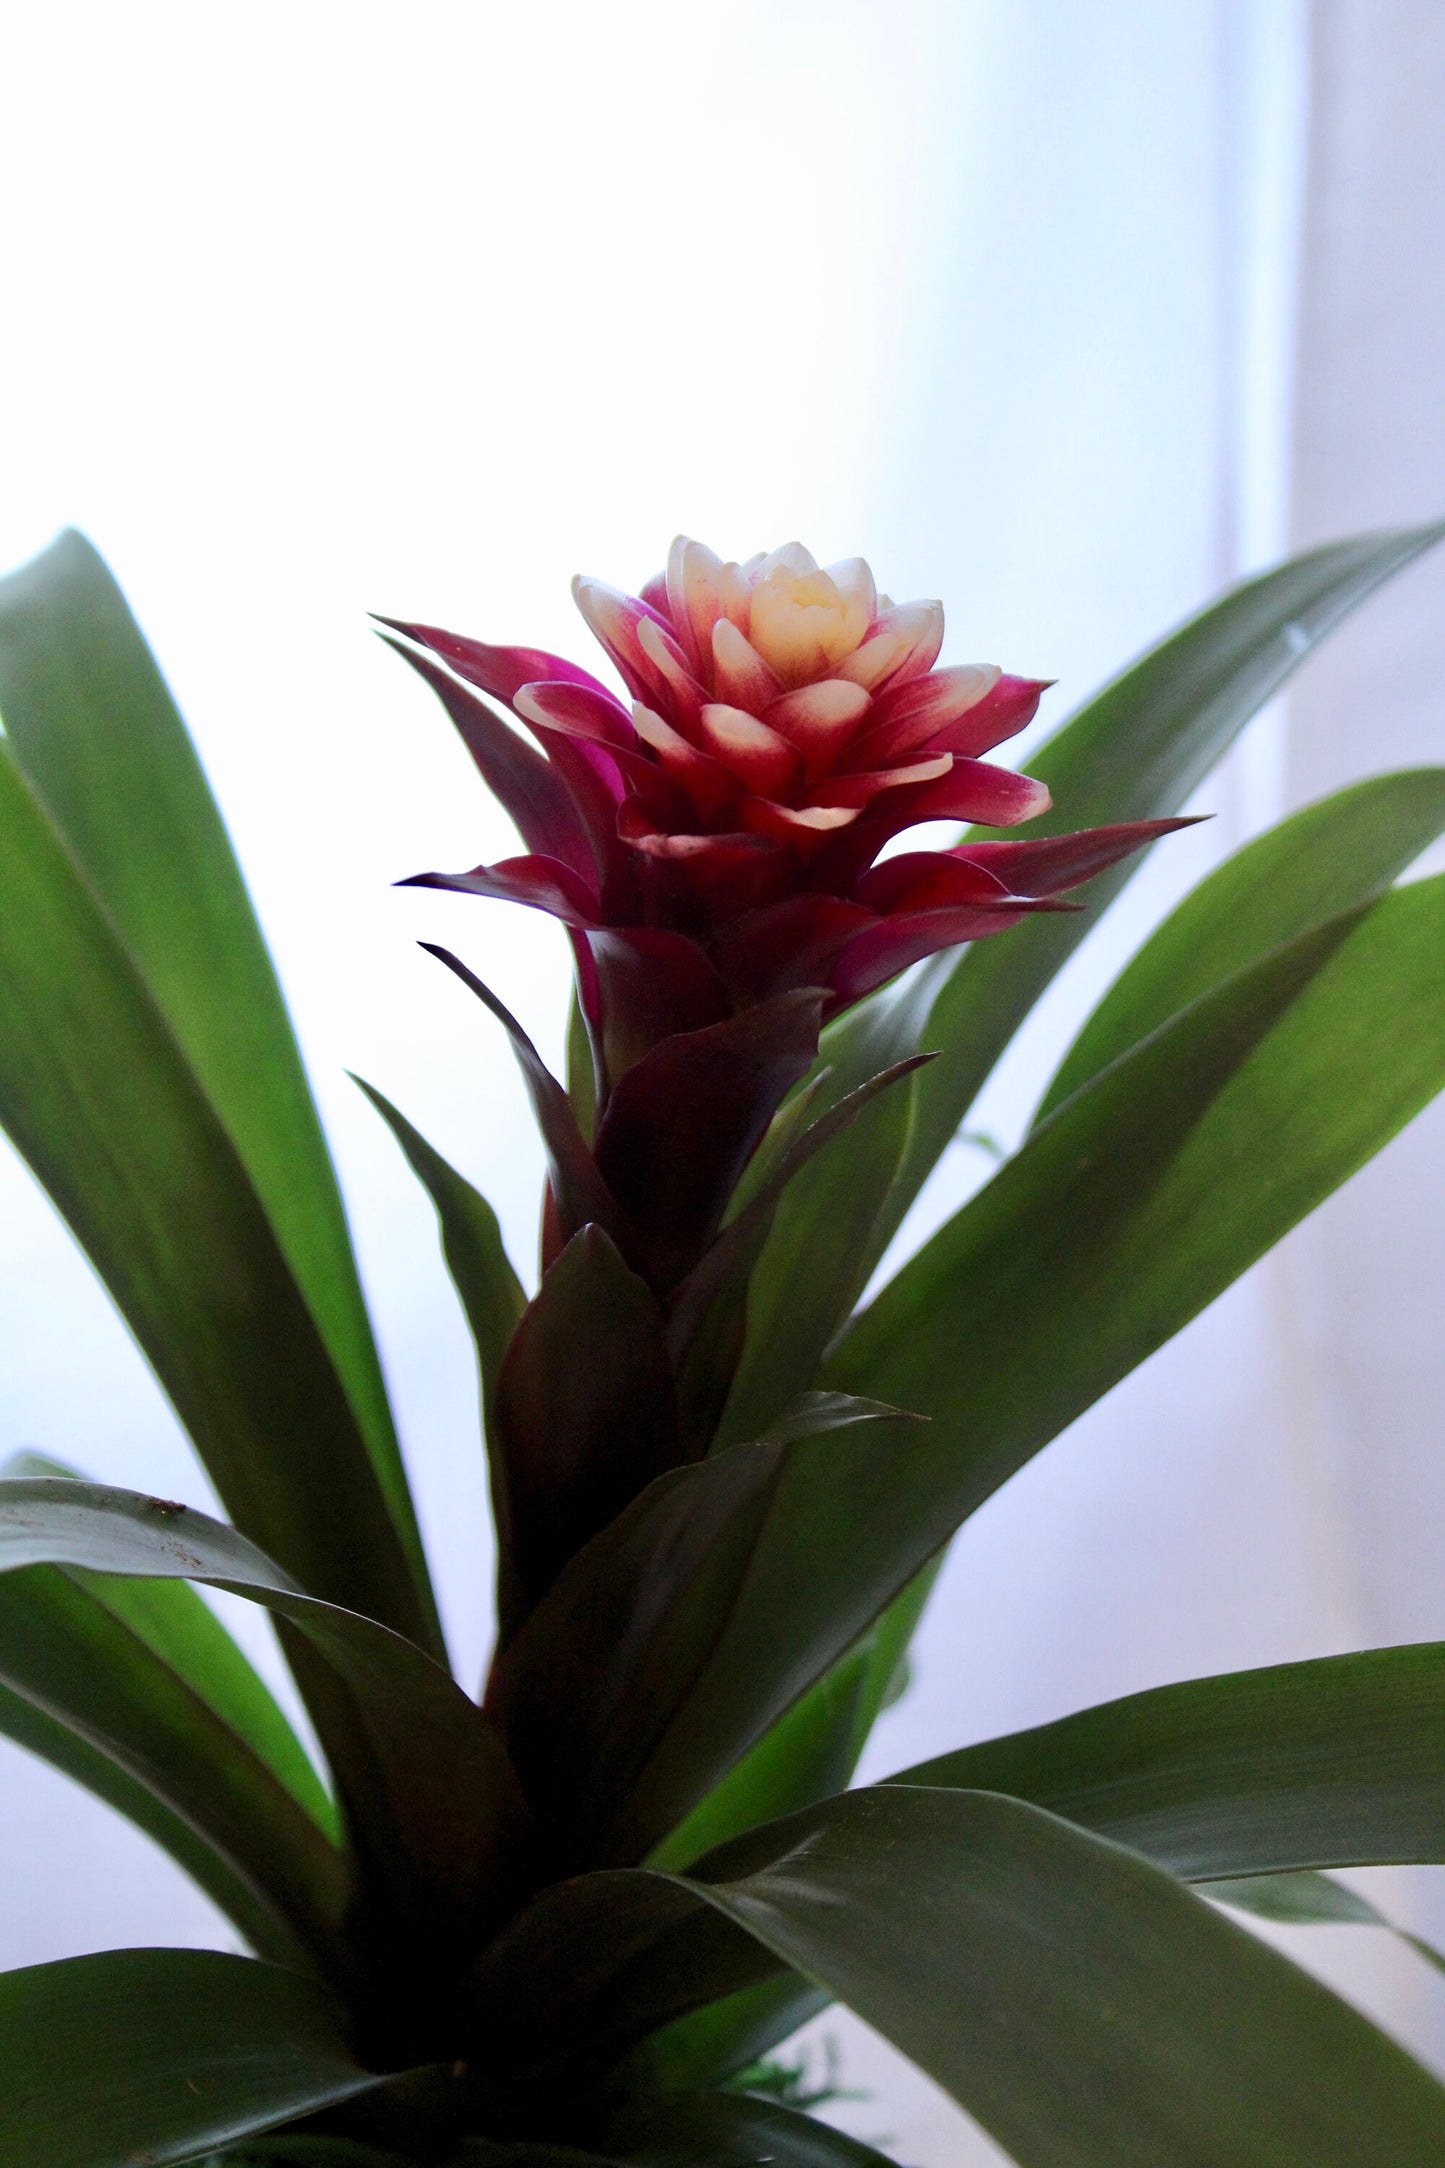 Beautiful white/red colored Bromeliad Kokedama - Moss ball, Japanese indoor garden technique, cleanliness look live house decoration.